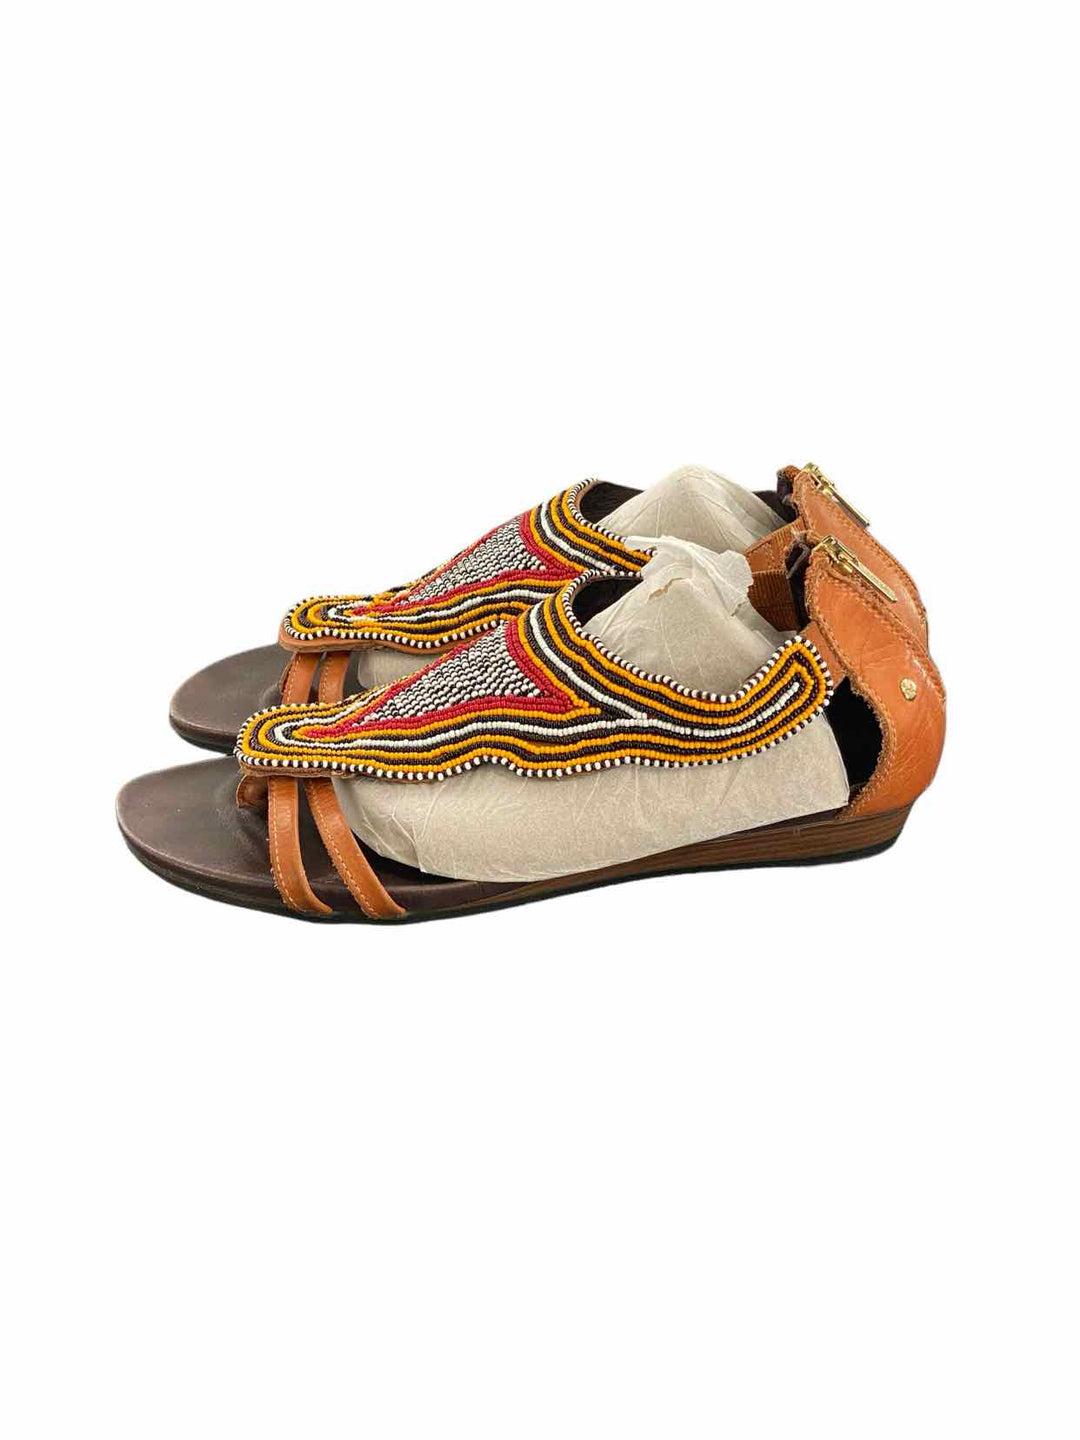 Pikolinos Shoe Size 40 Multi-Color Beaded Sandals